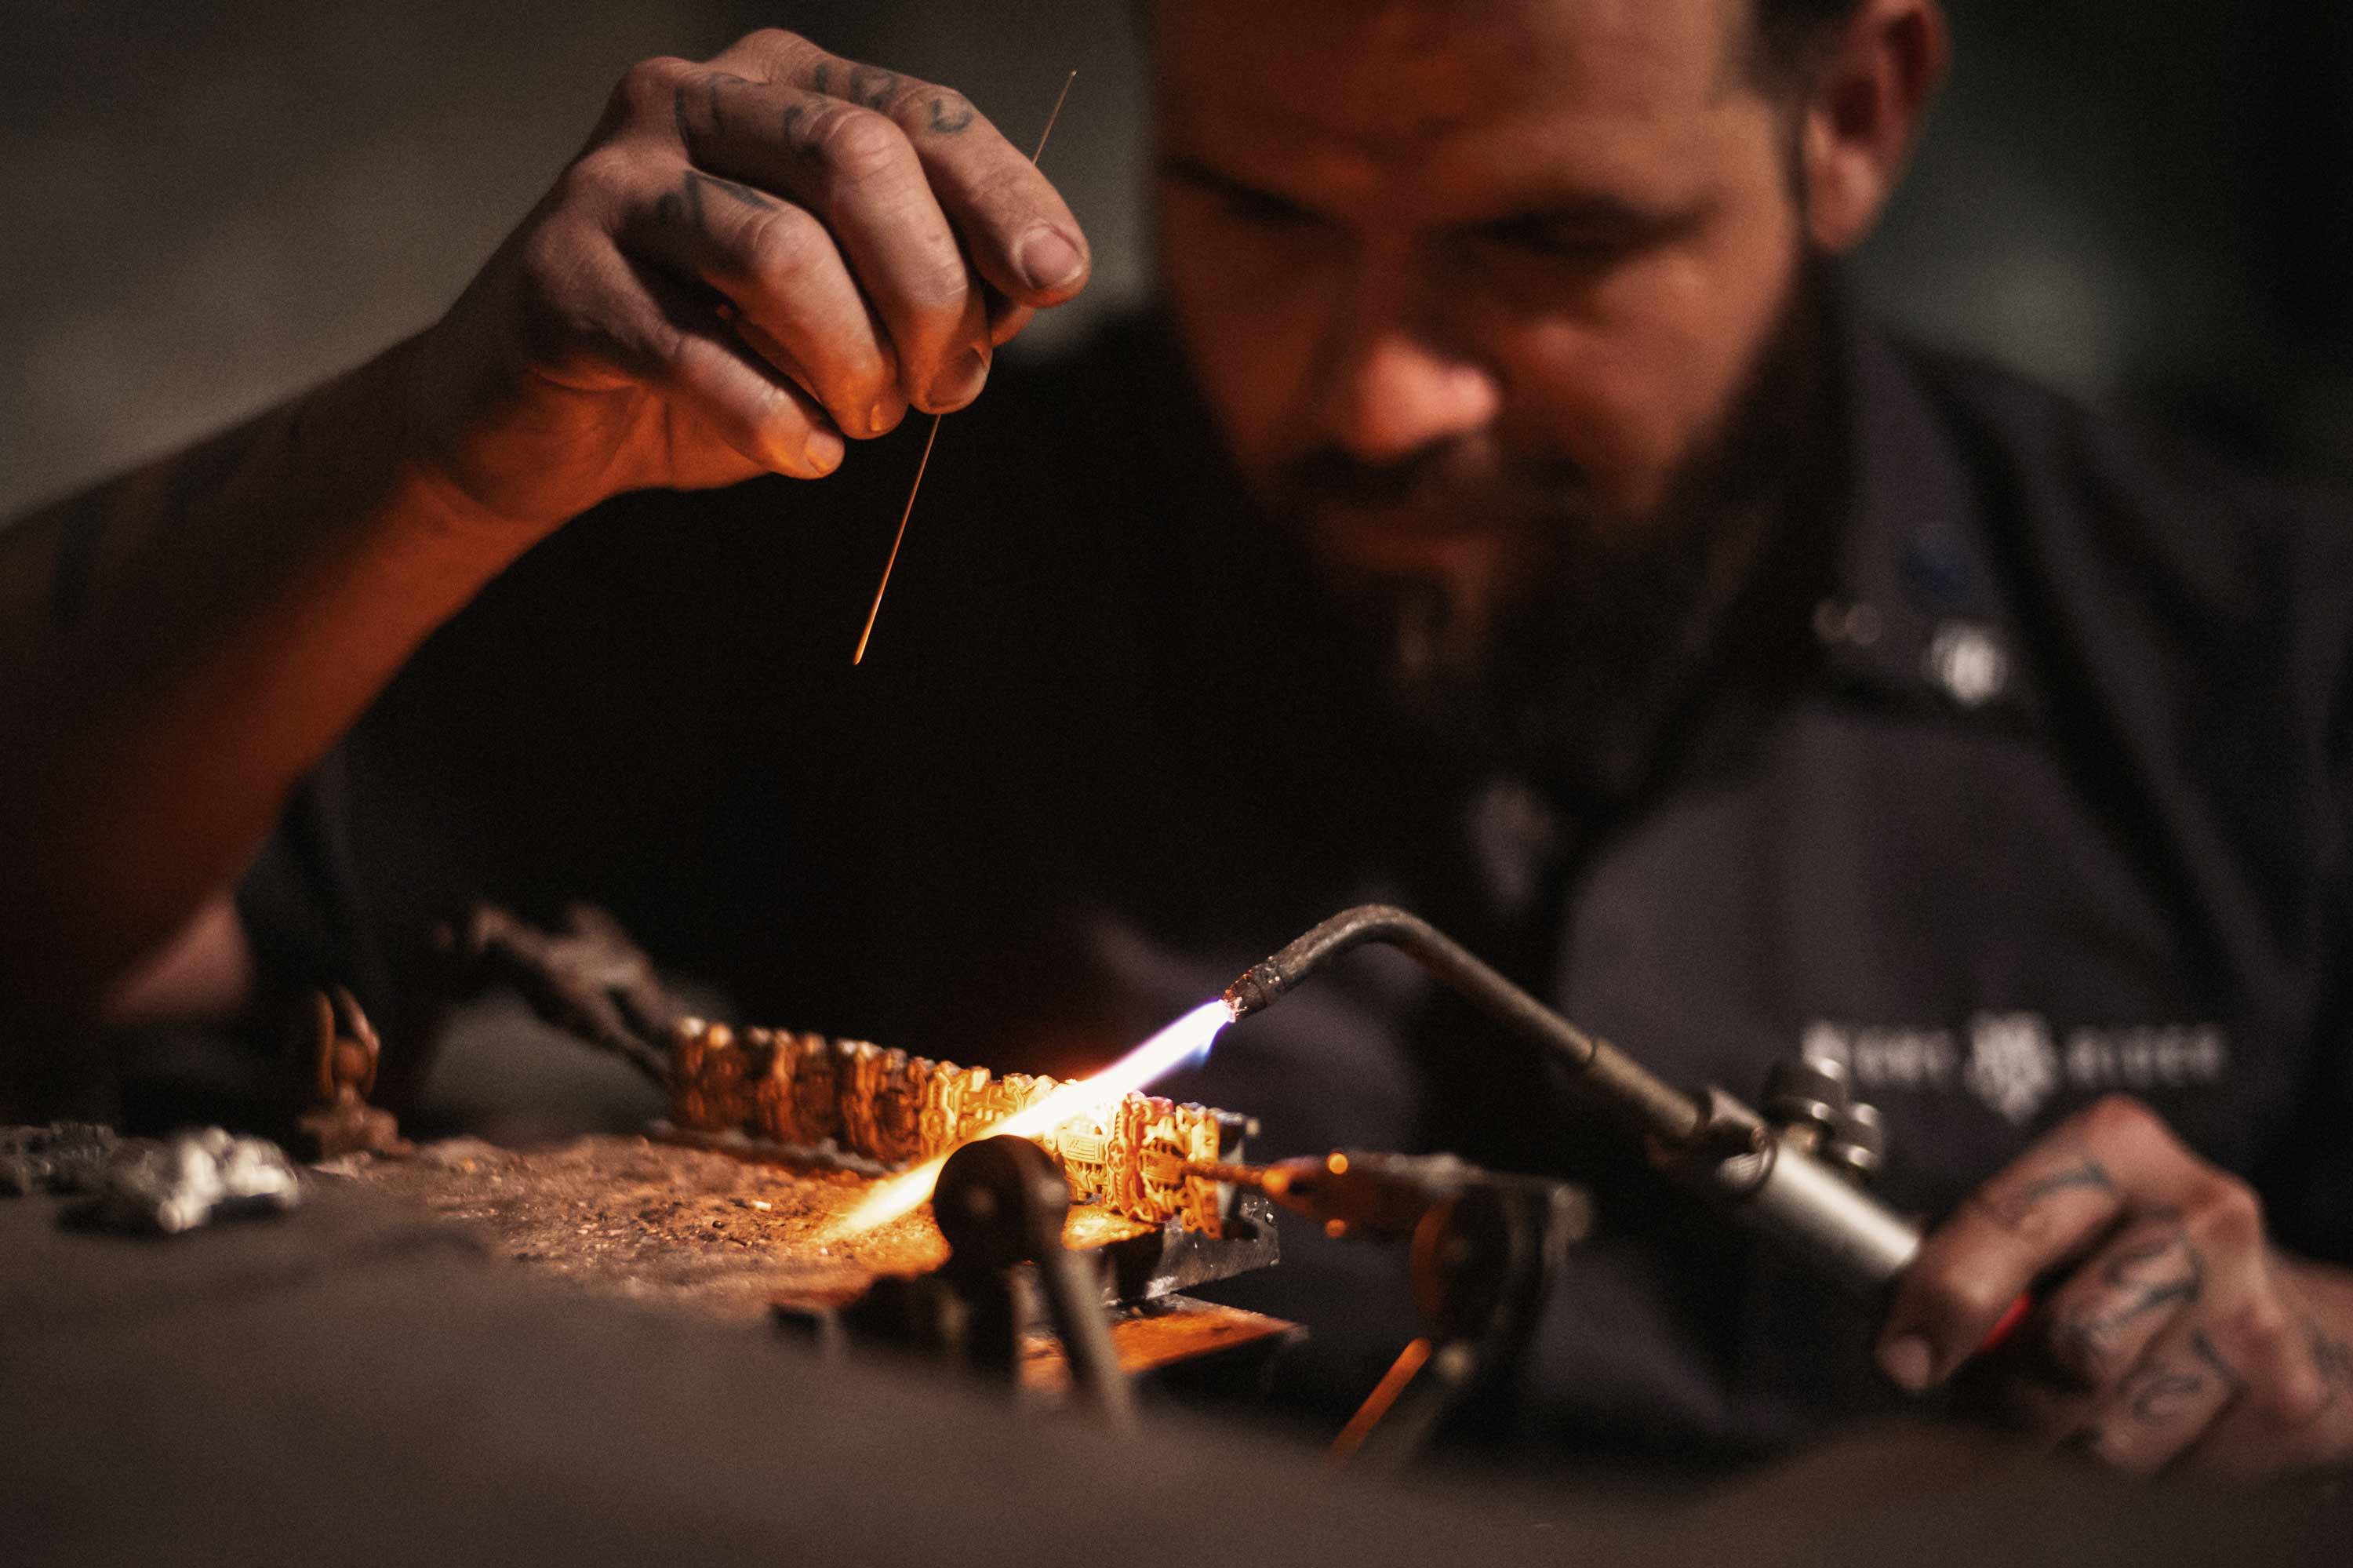 A NightRider Master Jewelry handcrafting a bracelet